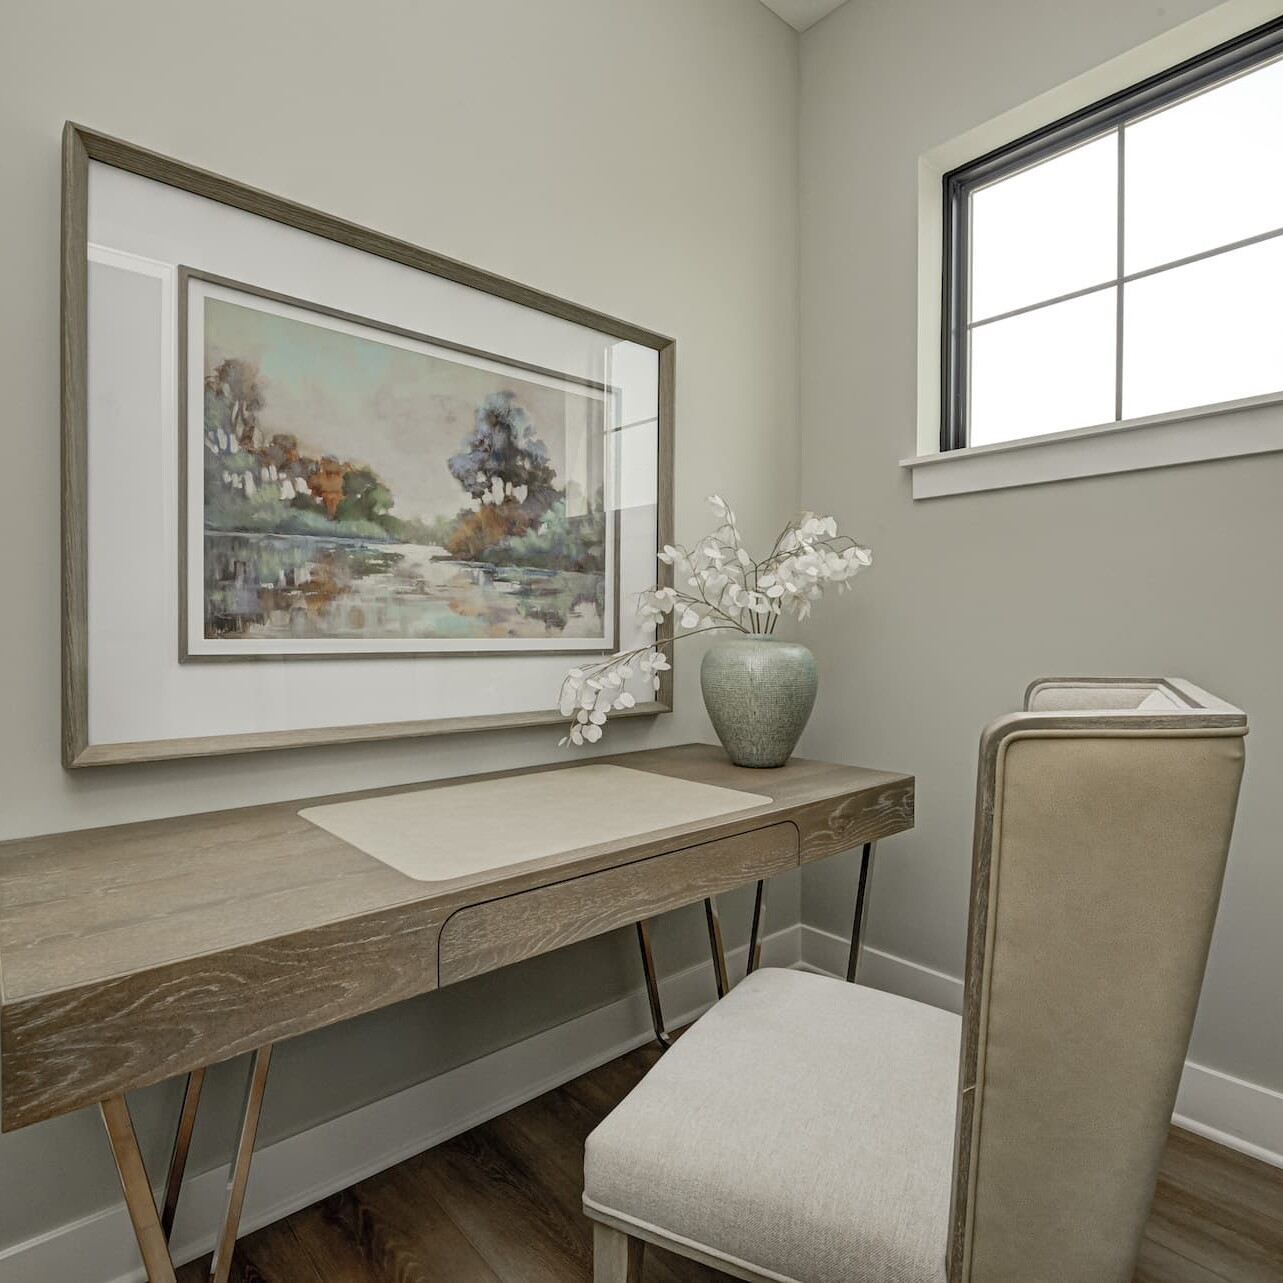 A room with a desk, chair and a painting designed by a Custom Home Builder in Fishers Indiana.